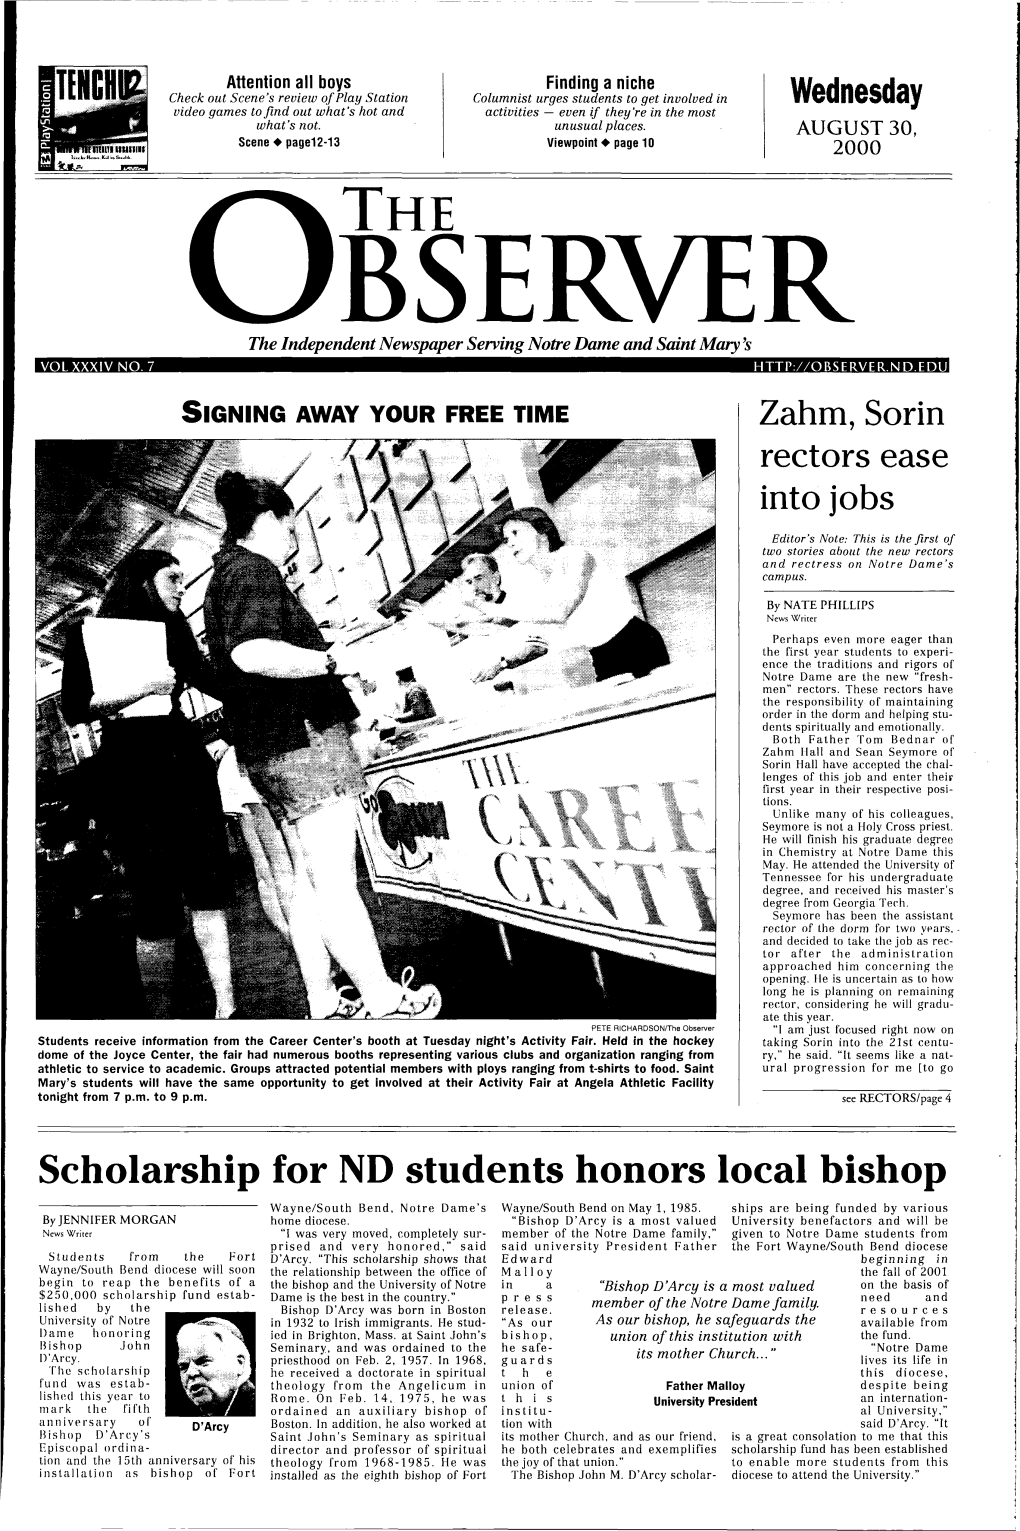 Scholarship for ND Students Honors Local Bishop Wayne/South Bend, Notre Dame's Wayne/South Bend on May 1, 1985